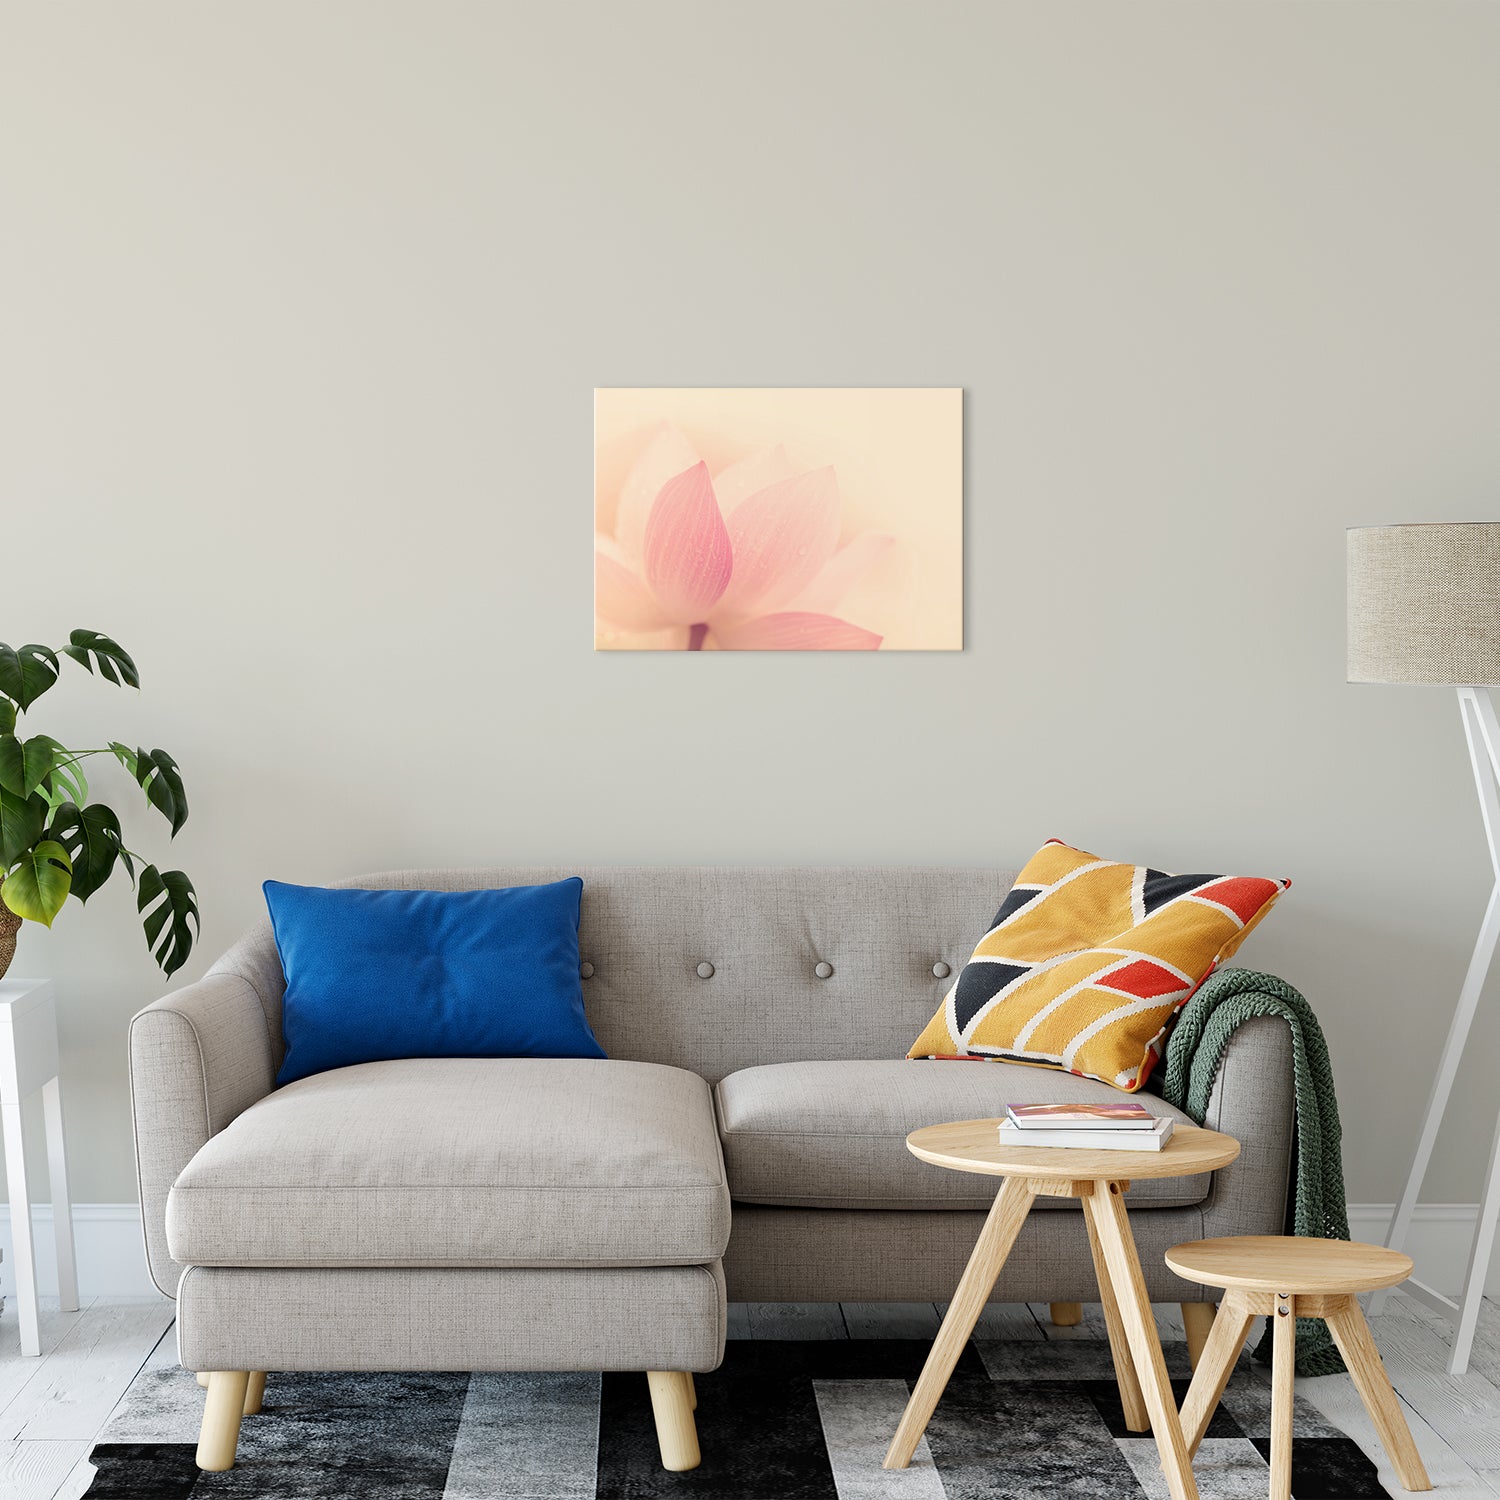 Tranquil Close-up Pink Lotus Petal Fine Art Canvas Print 20" x 24" - PIPAFINEART